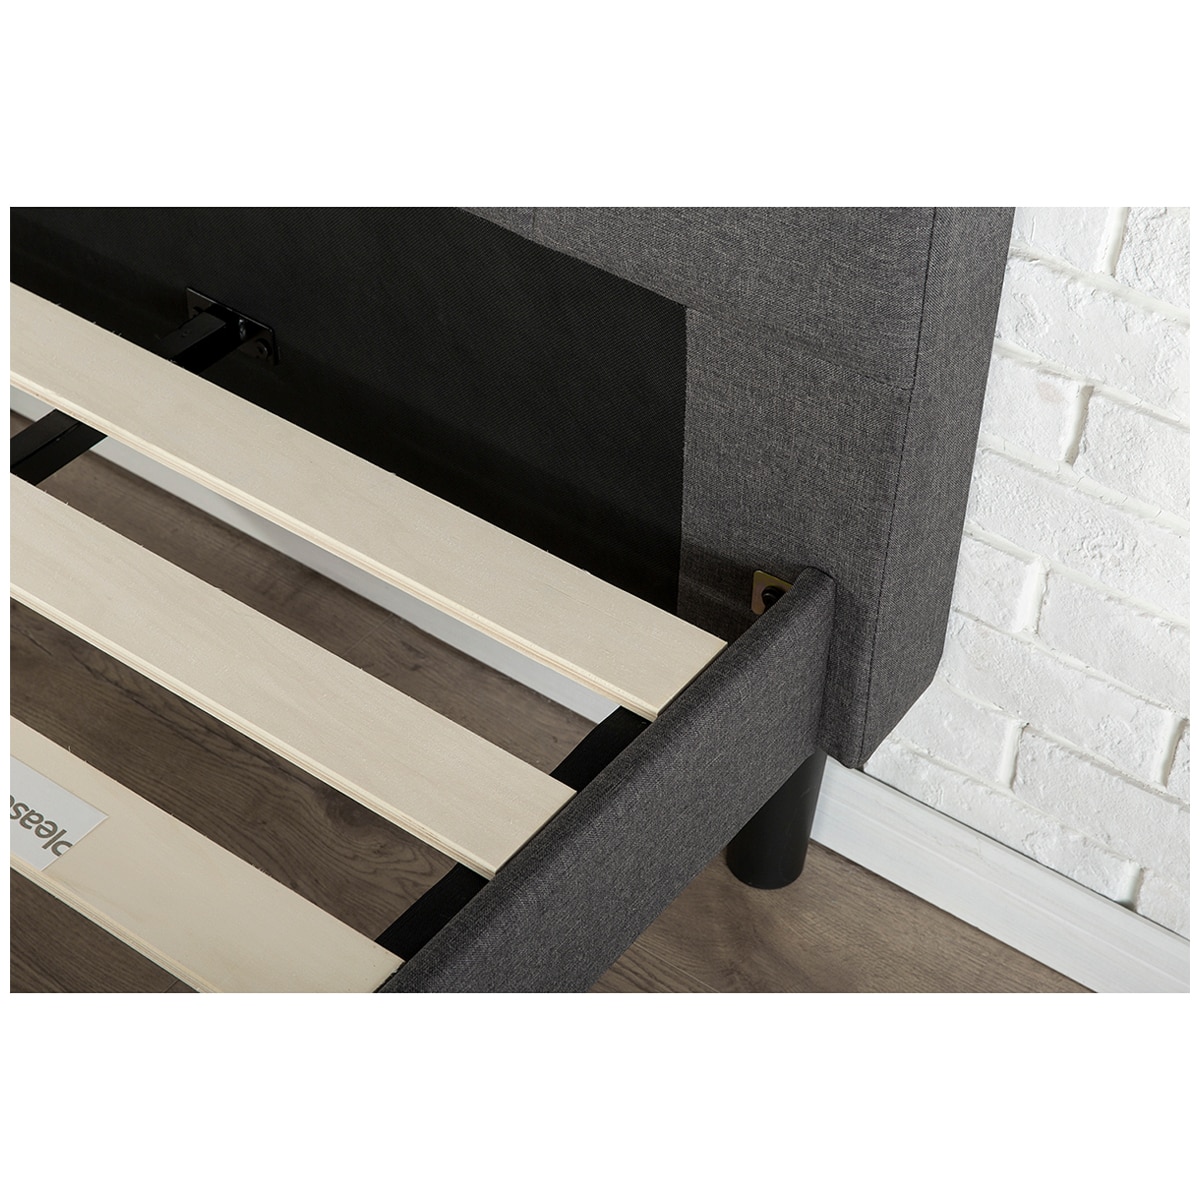 Blackstone Square Stitched Single Bed - Images Update Request